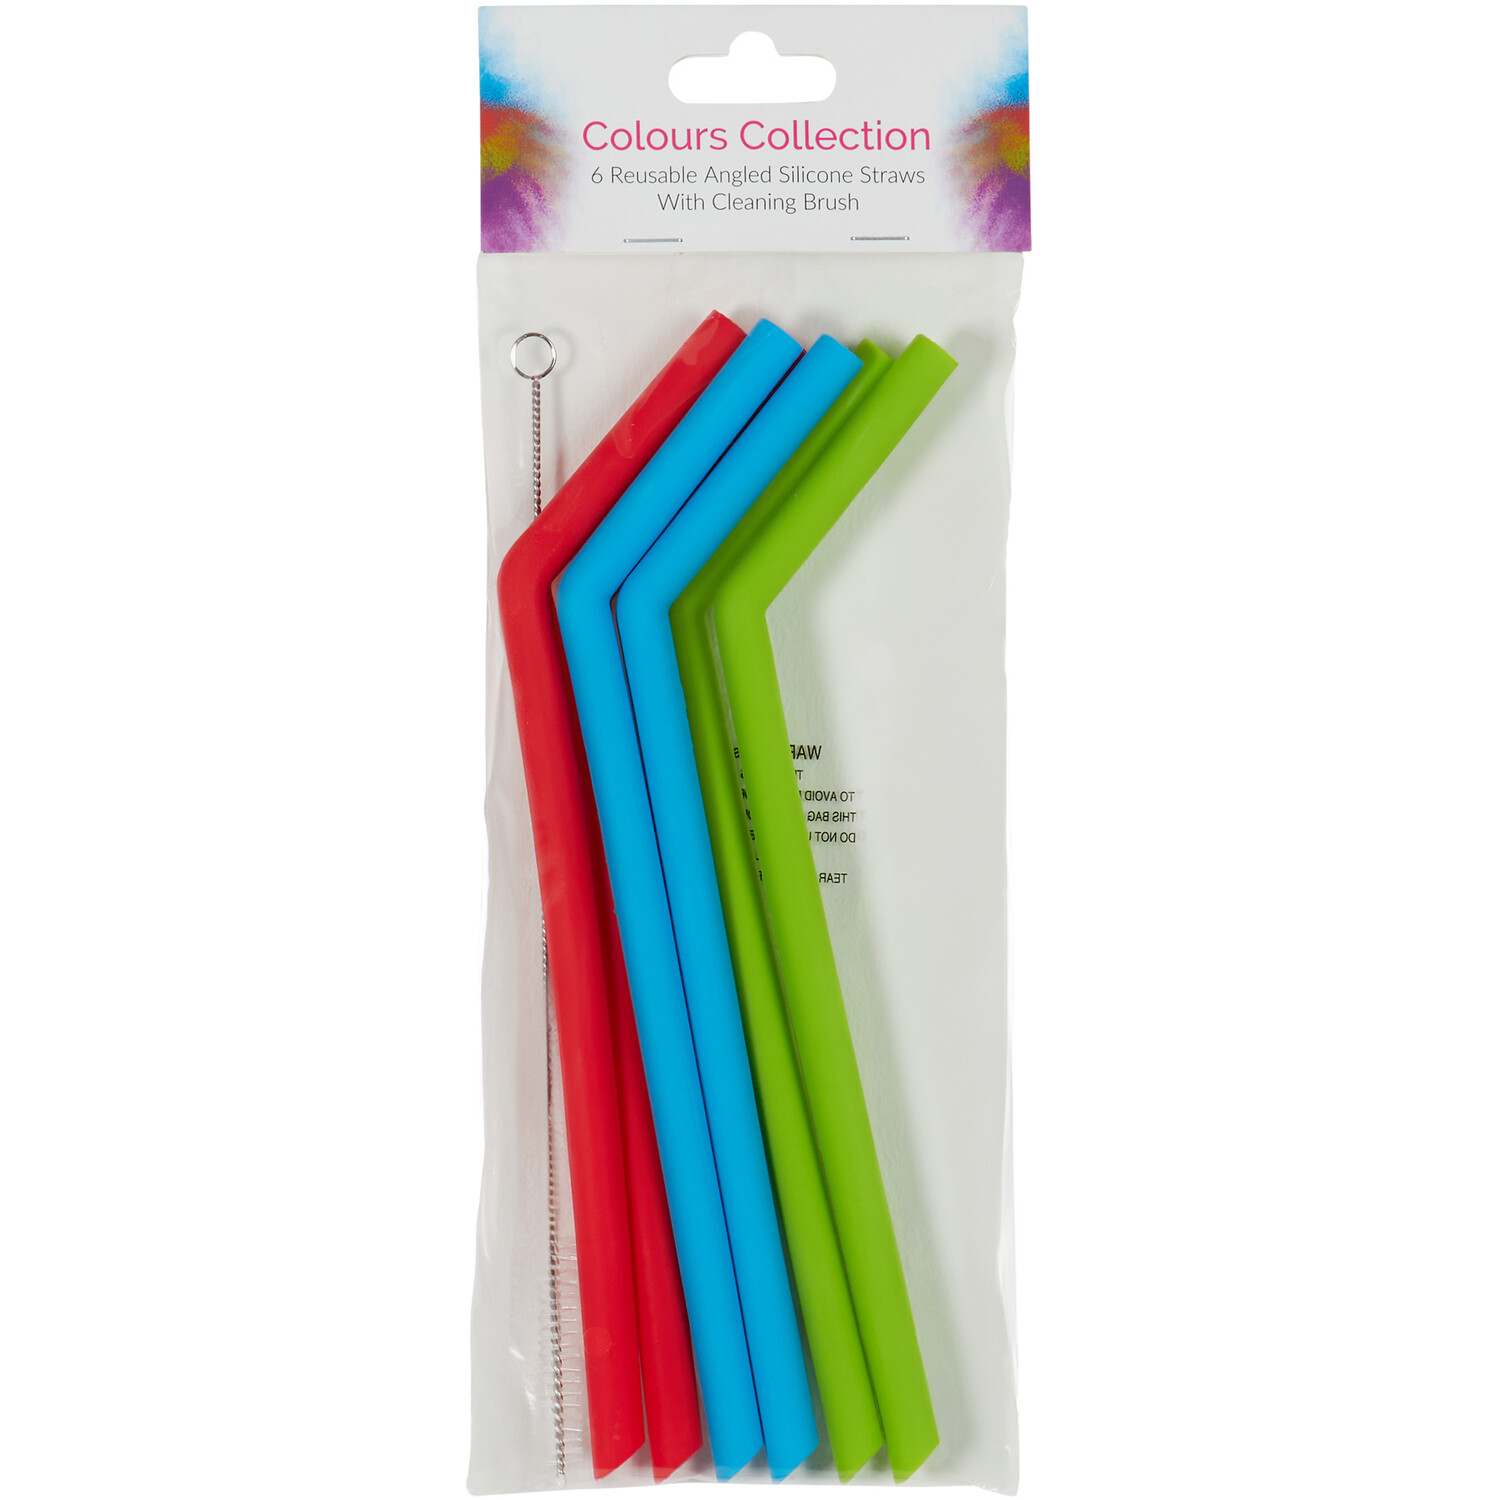 Pack of 6 Reusable Angled Silicone Straws Image 1